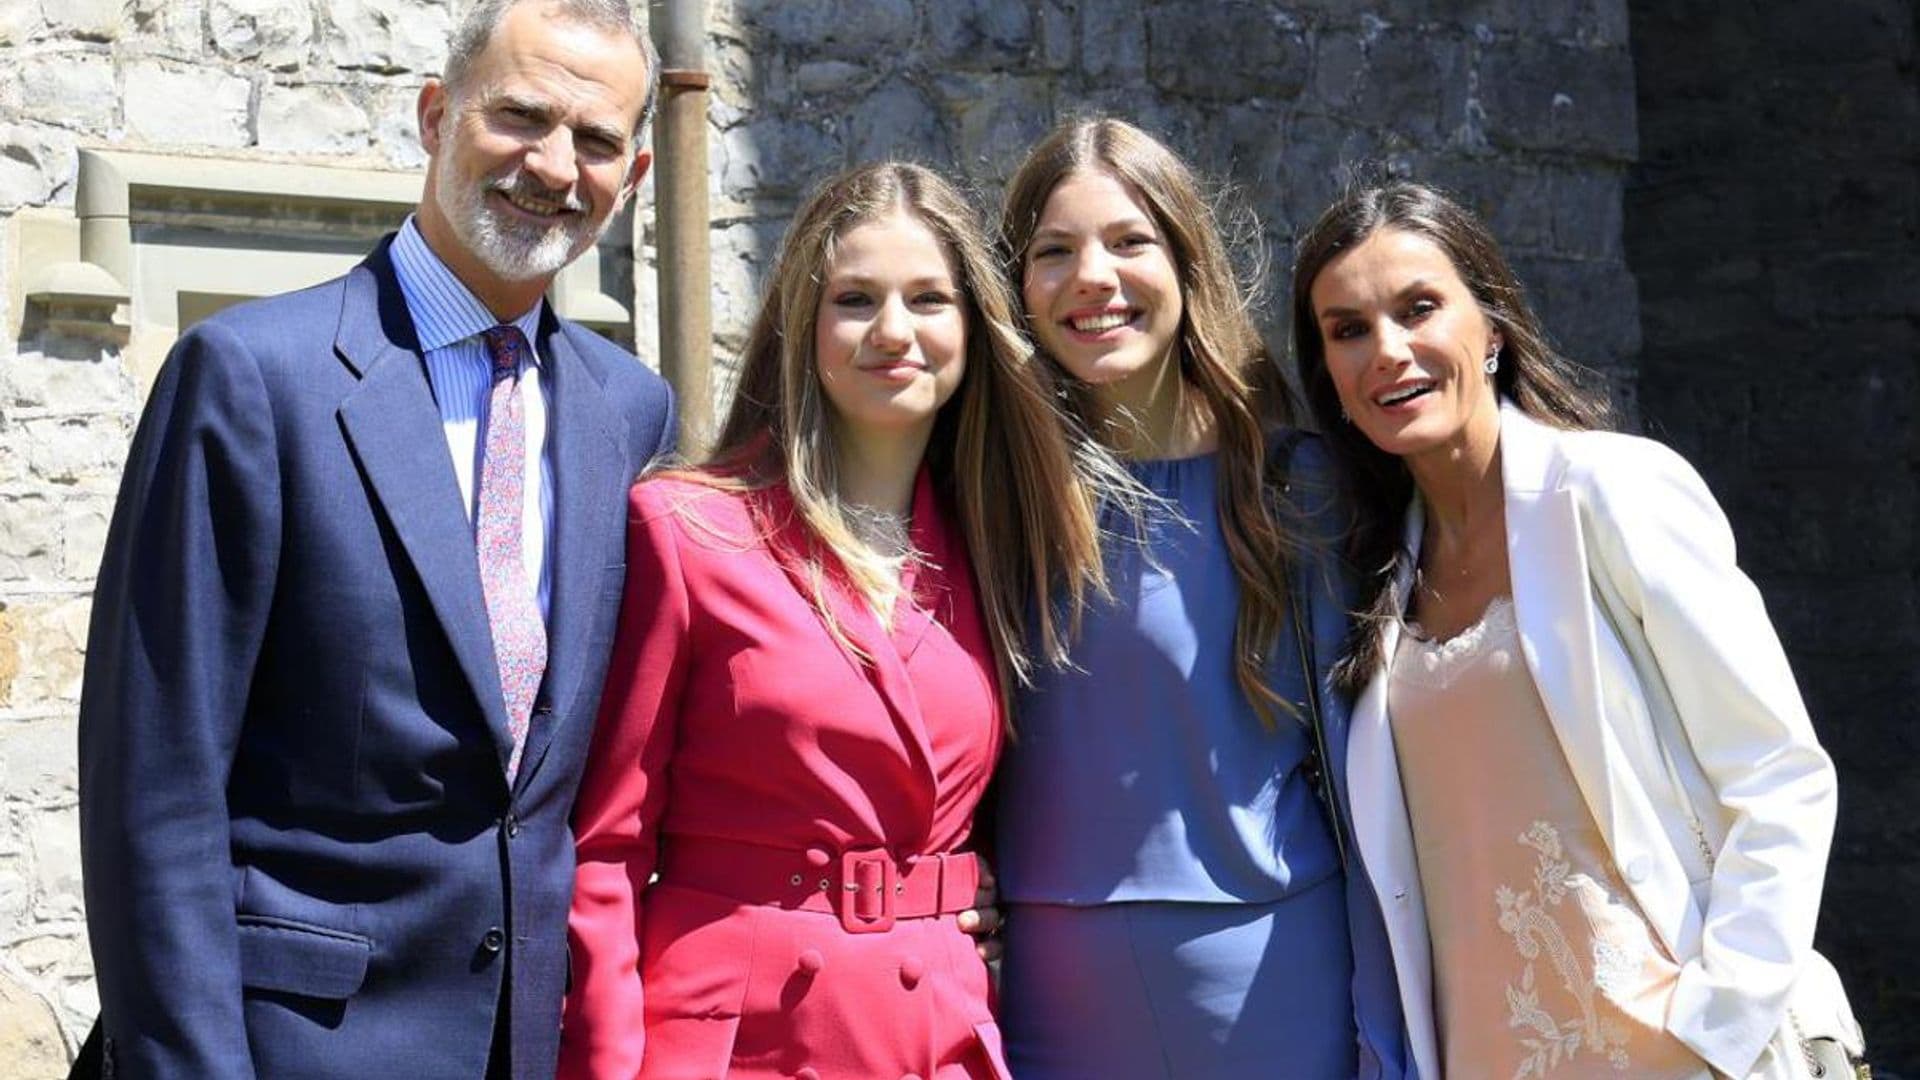 Queen Letizia proves she’s like any other proud mom at daughter’s graduation